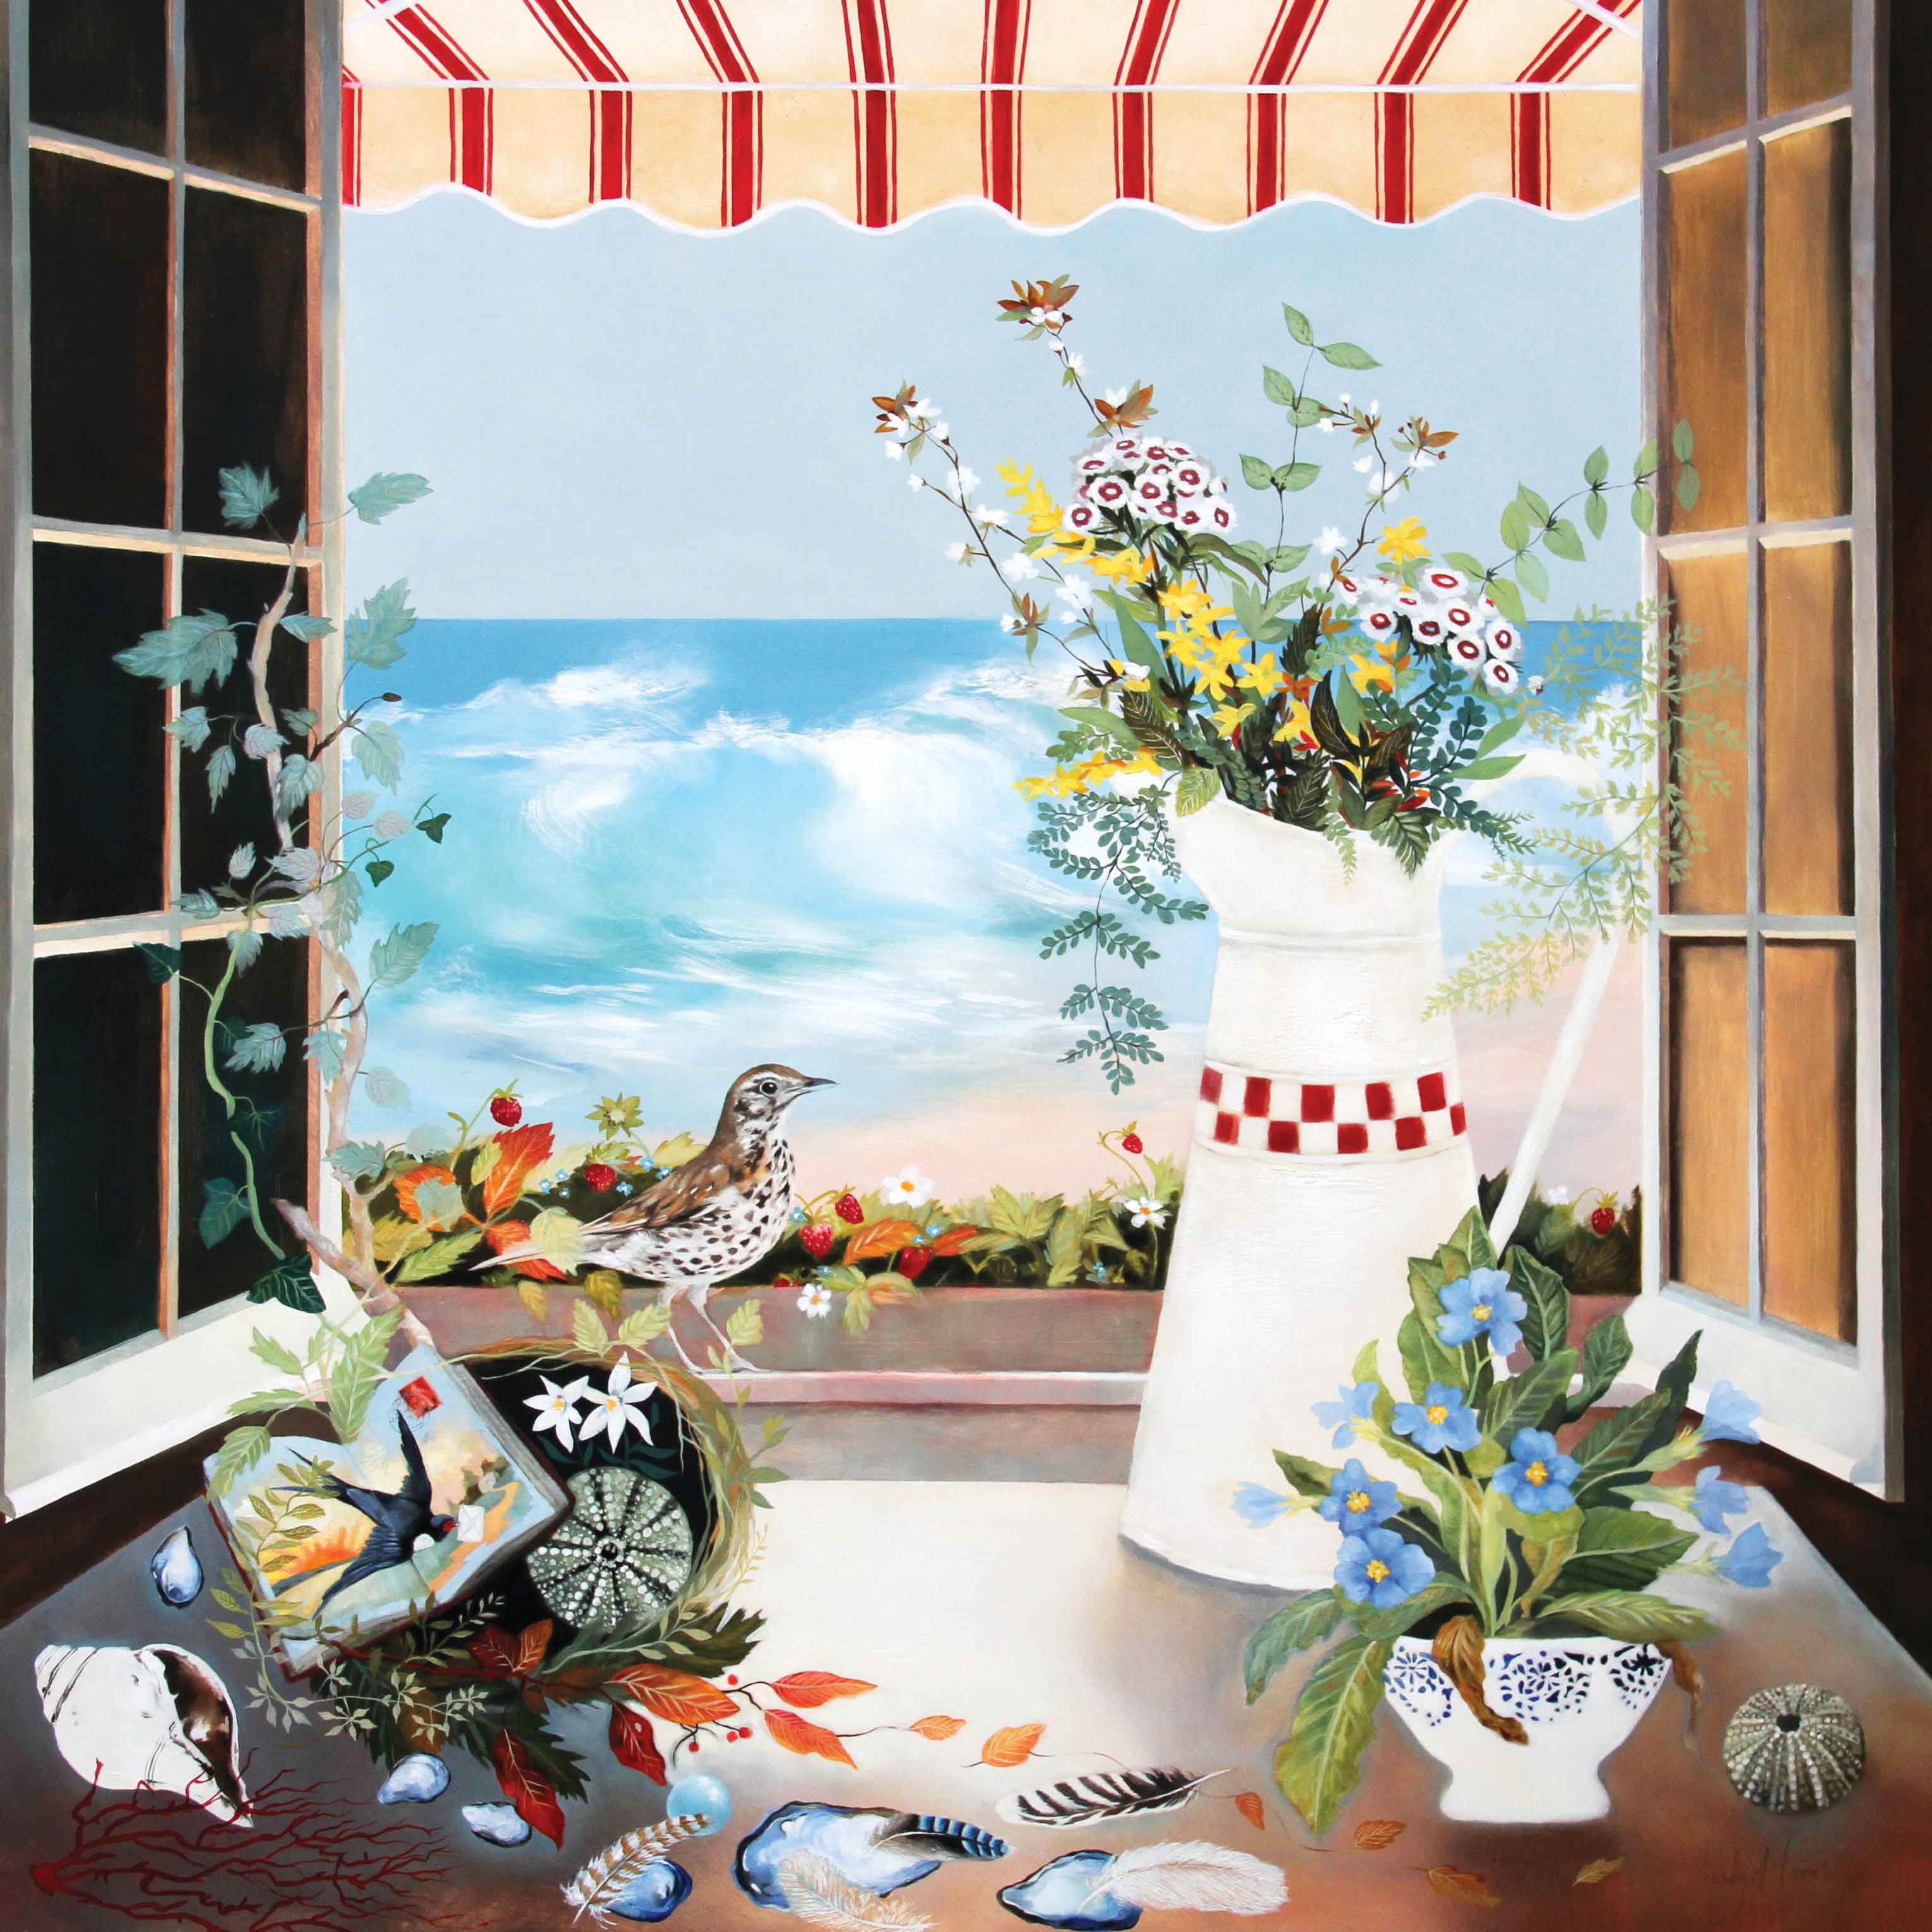 Art greeting card by Lesley McLaren, a window still life with flowers and the sea outside the window